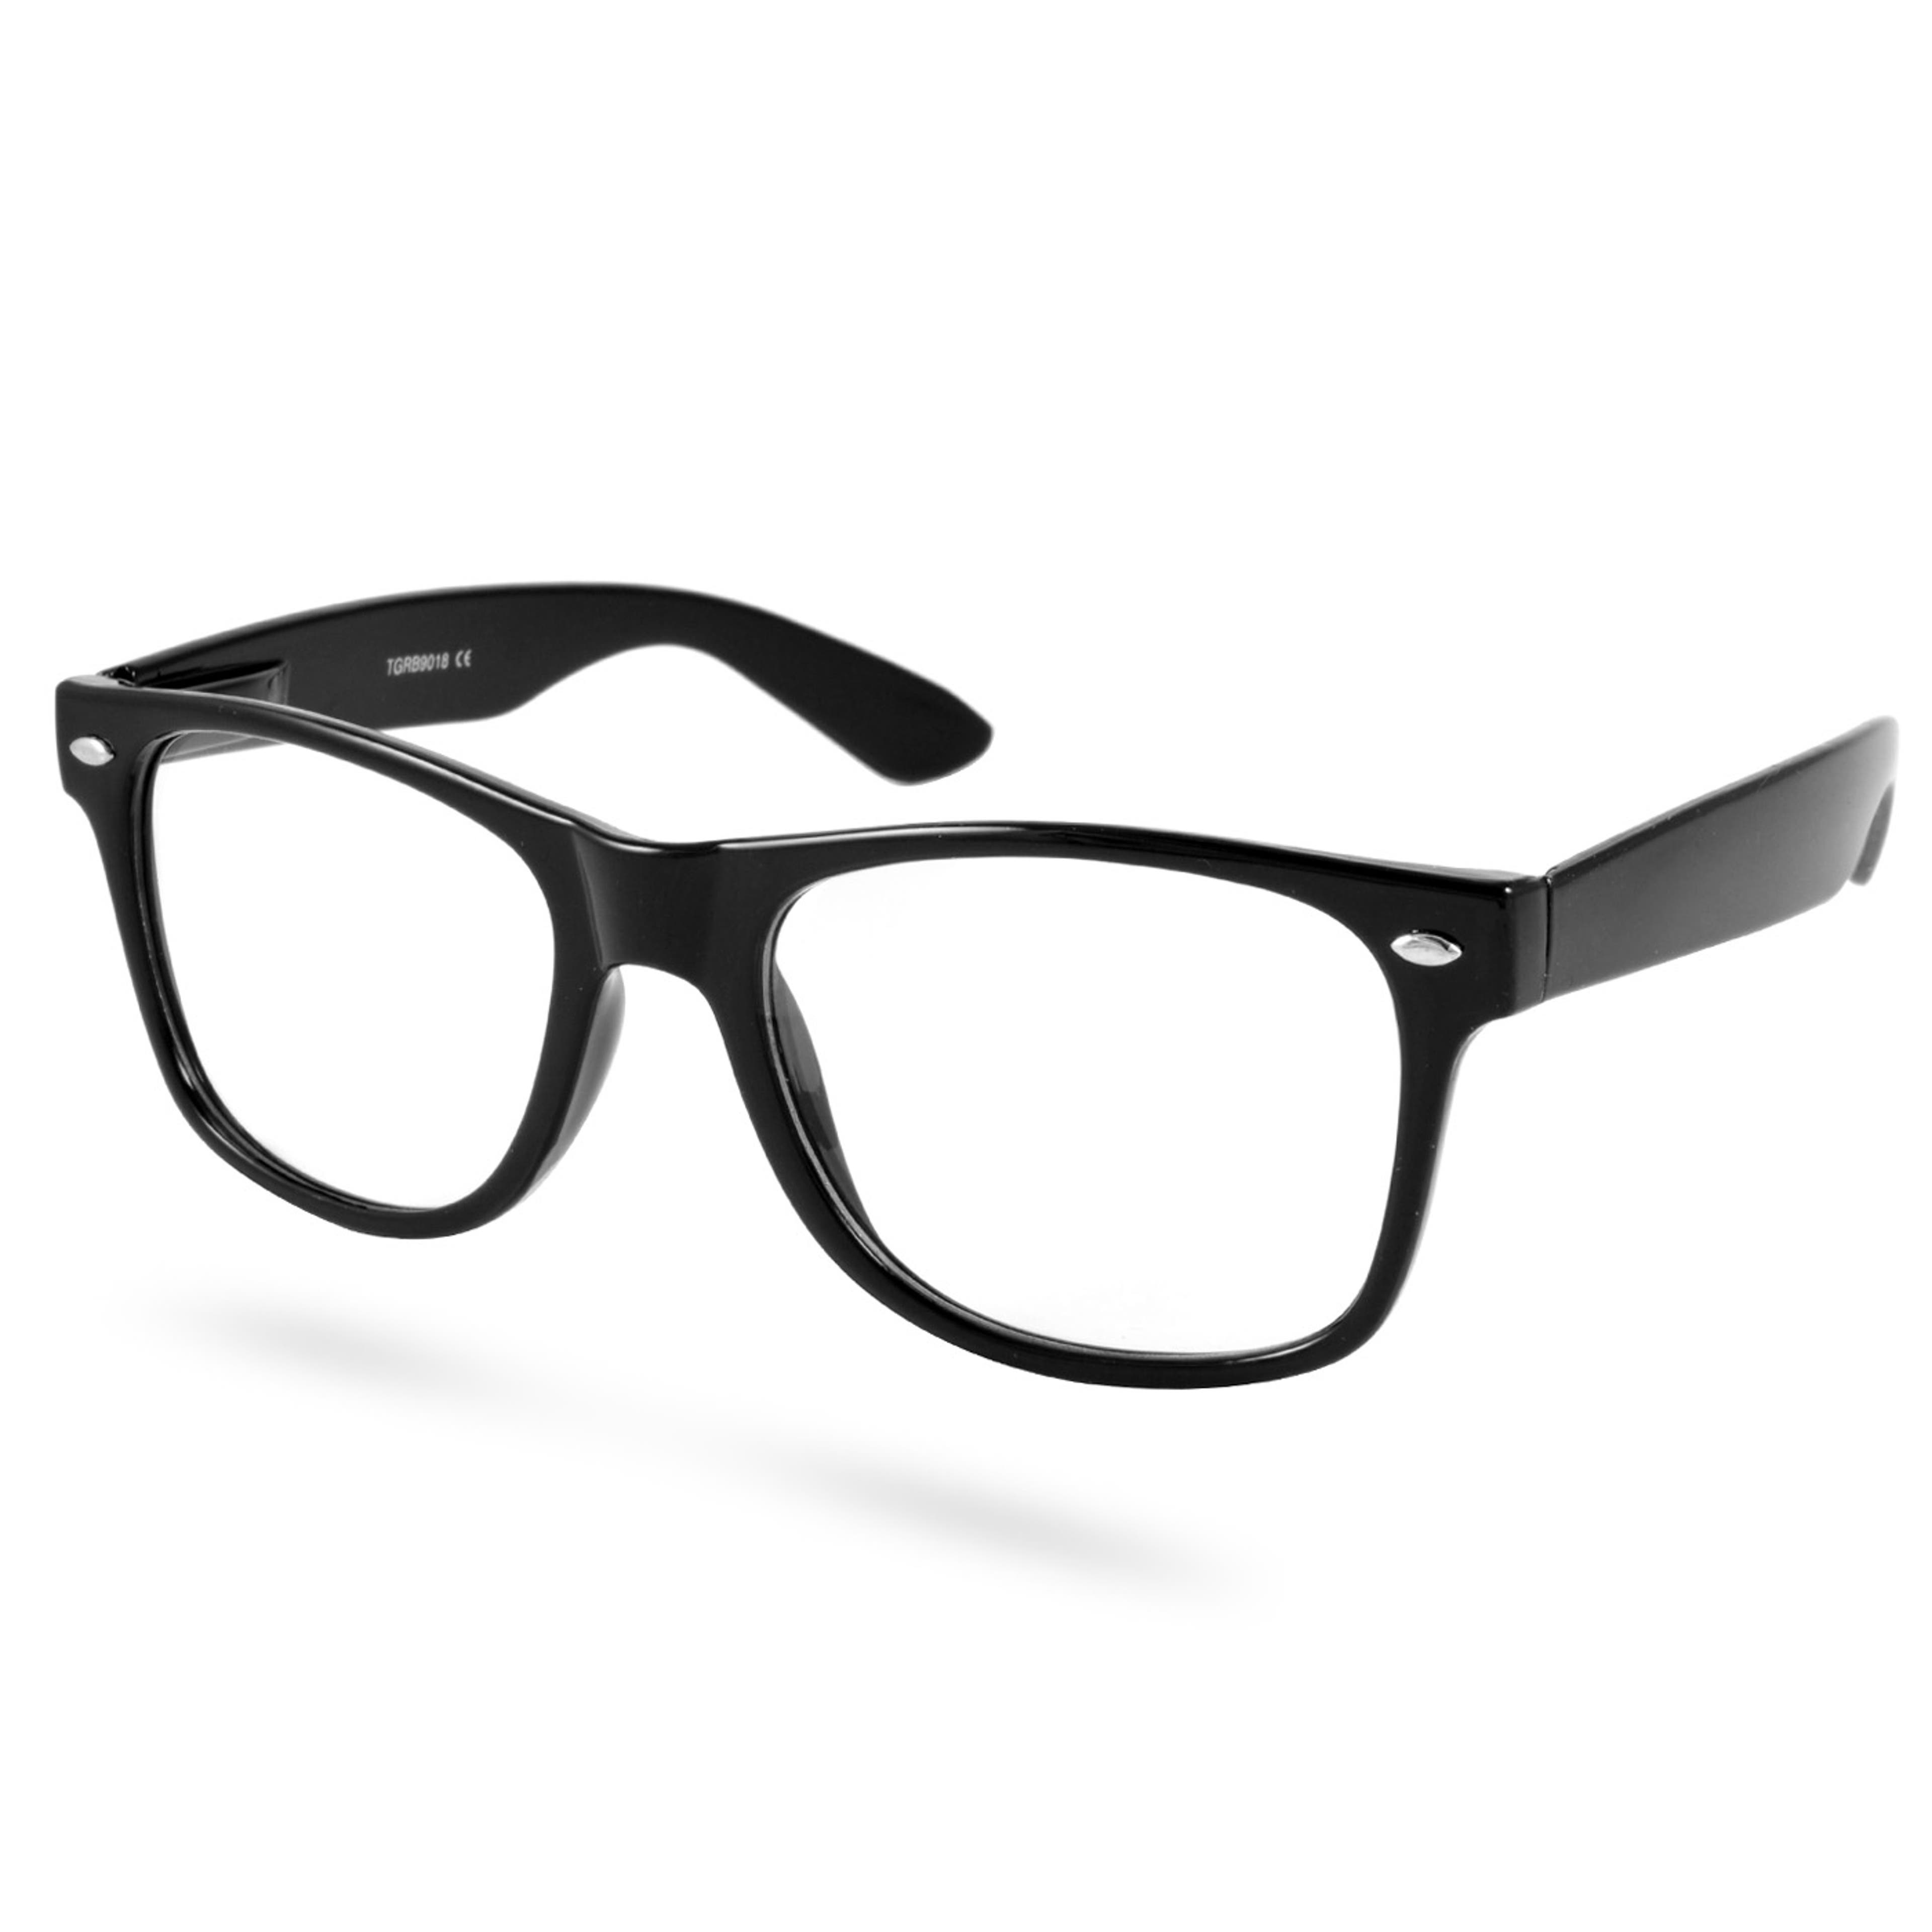 Black Retro Glasses With Clear Lenses